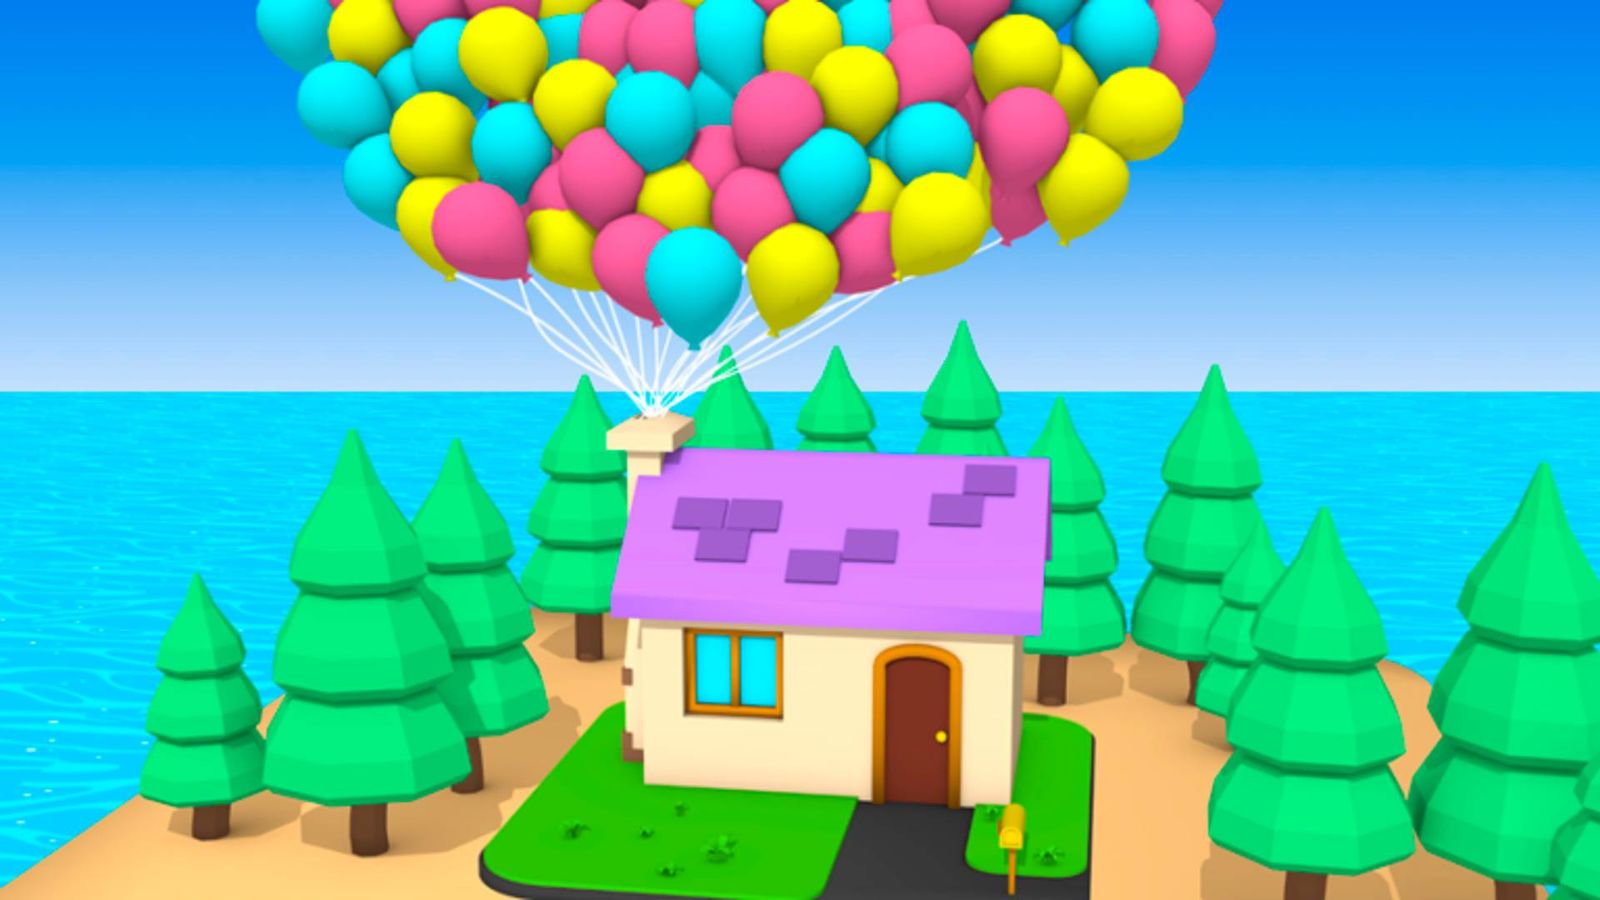 A floating house in Balloon Simulator on Roblox.